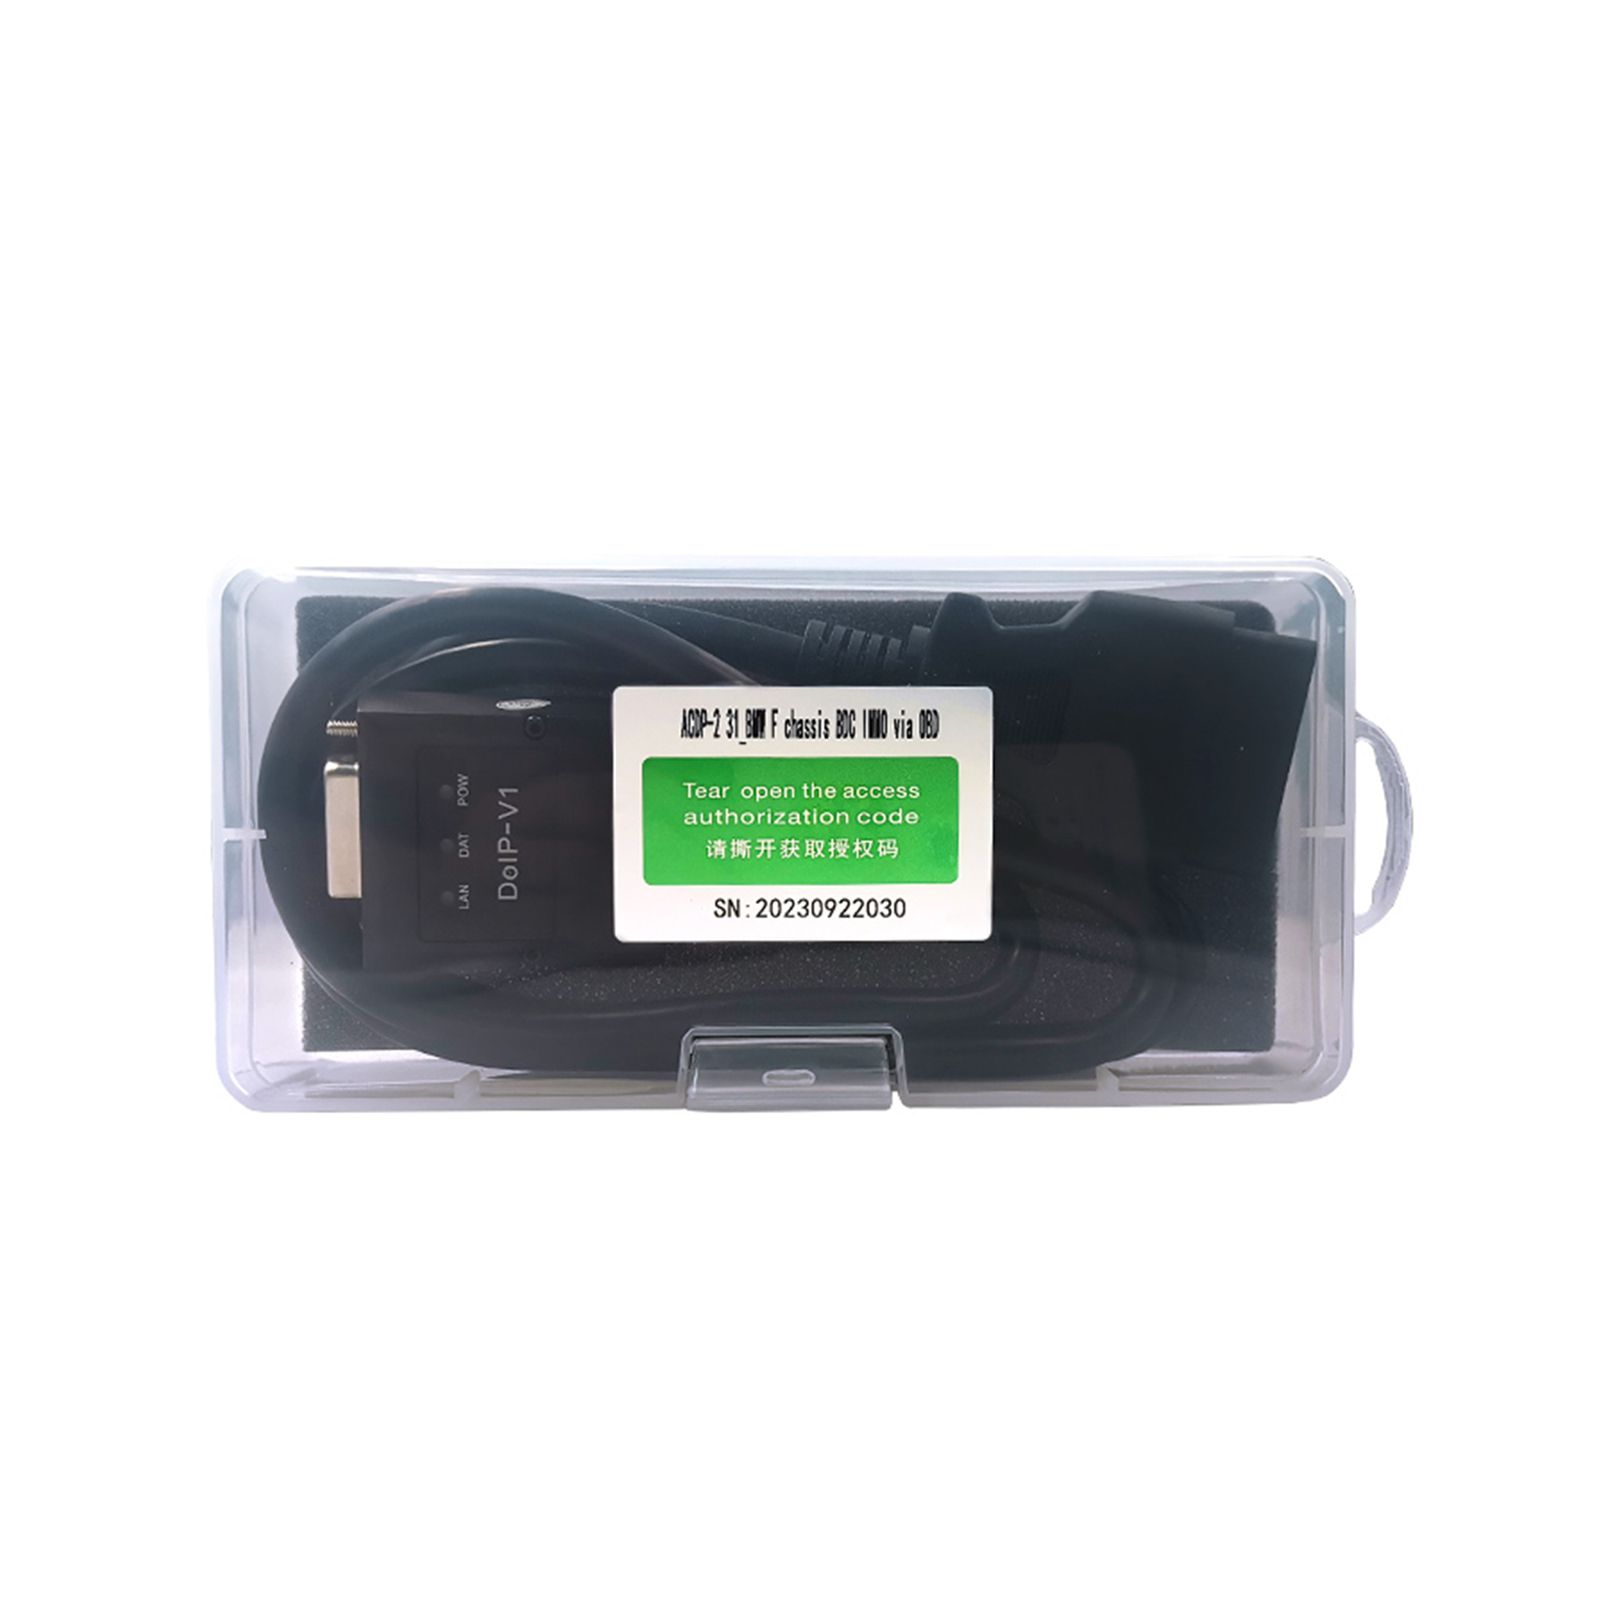 Yanhua Mini ACDP ACDP-2 Module31 with License A501 for BMW F chasis BDC Key Programming and Mileage Reset Via OBD